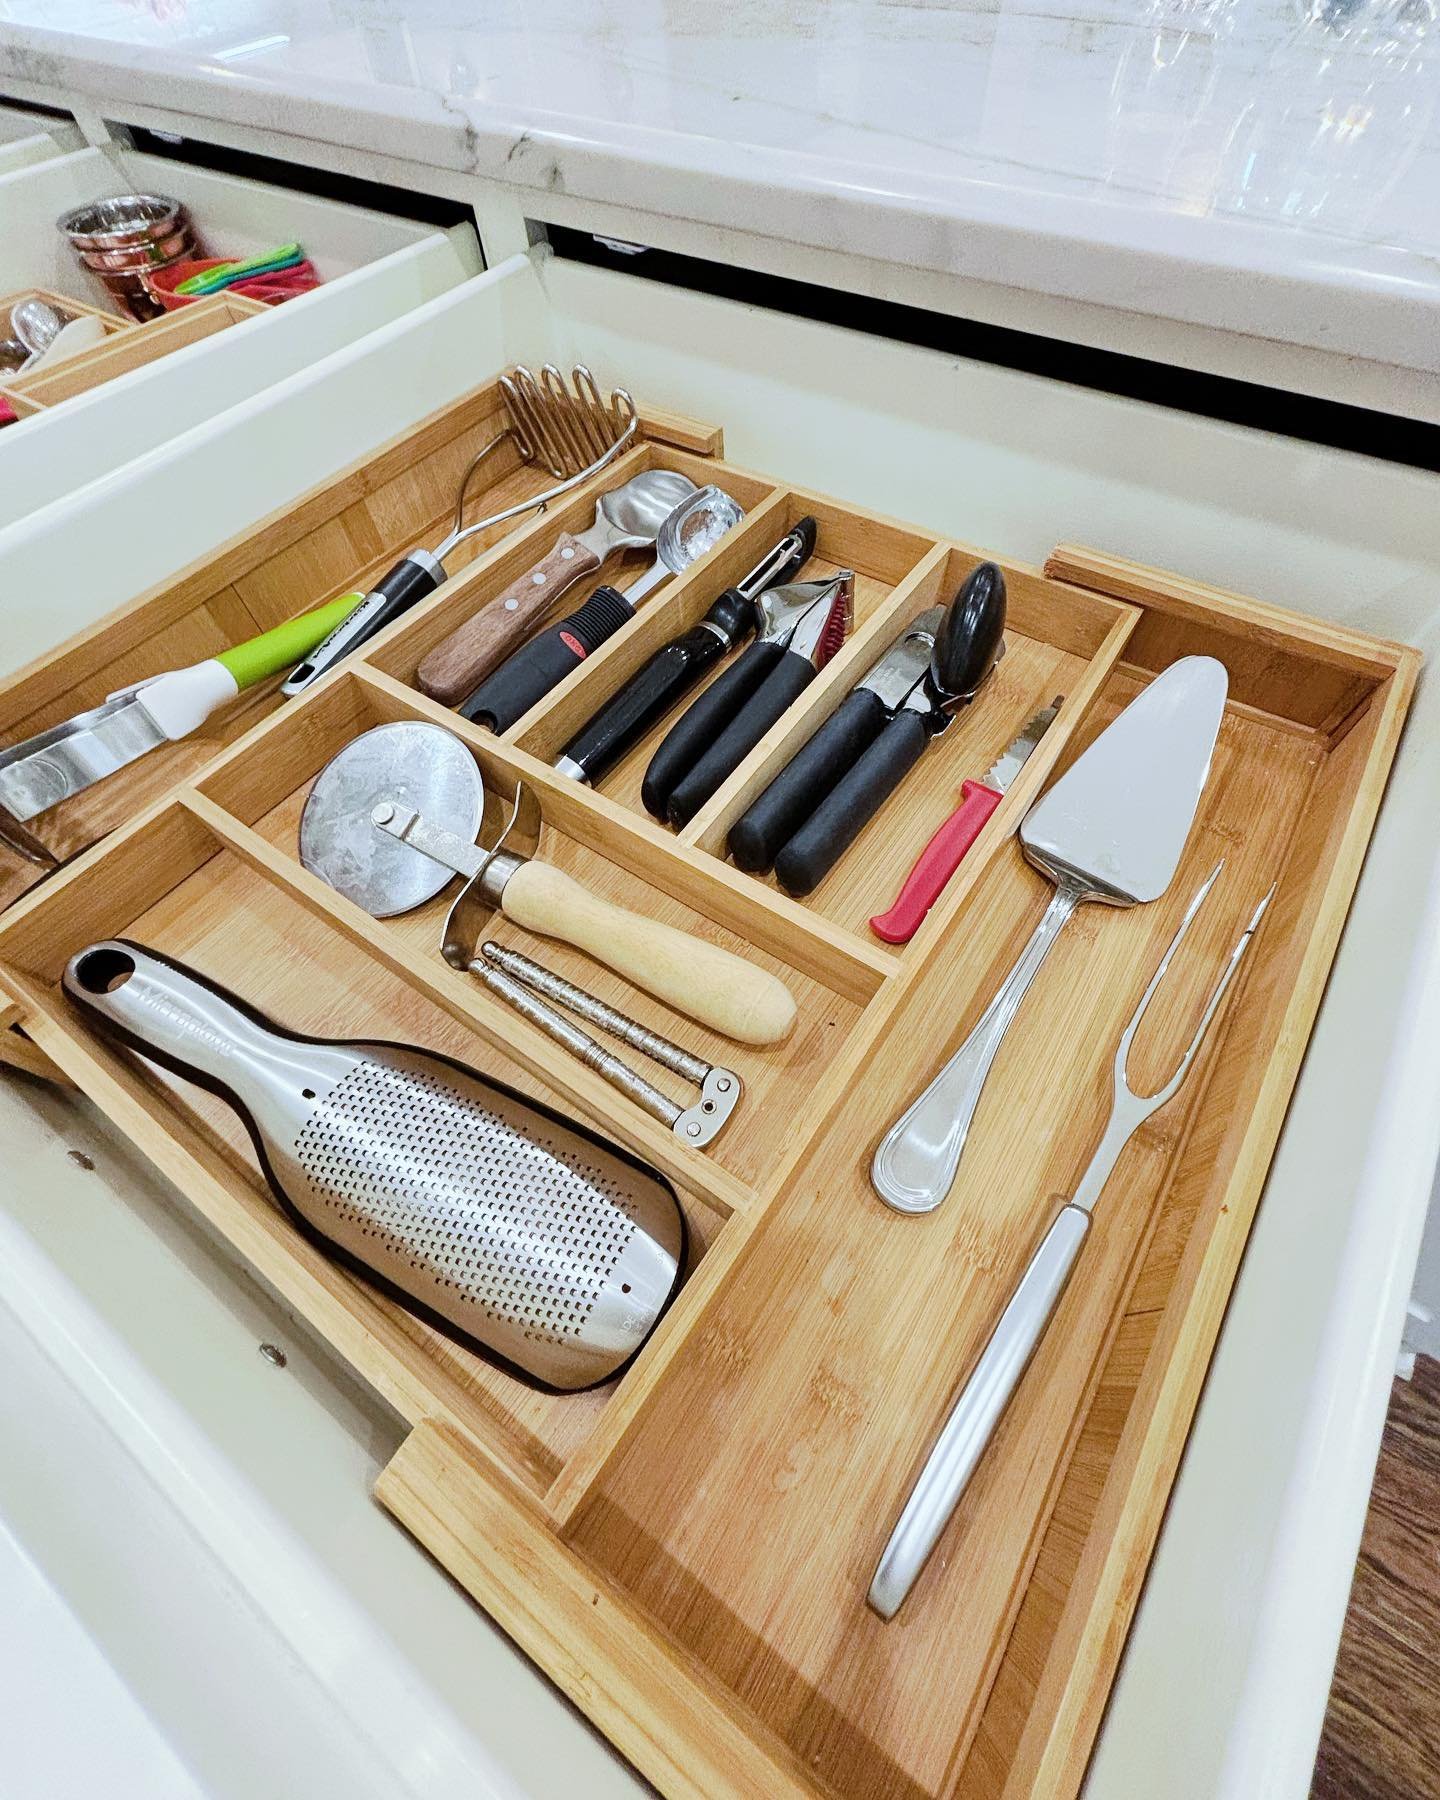 Expandable Bamboo Drawer Inserts. 🎍

We rarely do a kitchen without them.  Works so well for so many things and keeps everything in its places. 🍴

From cutlery, to utensils to the catch all drawer- this product is a winner in our book.